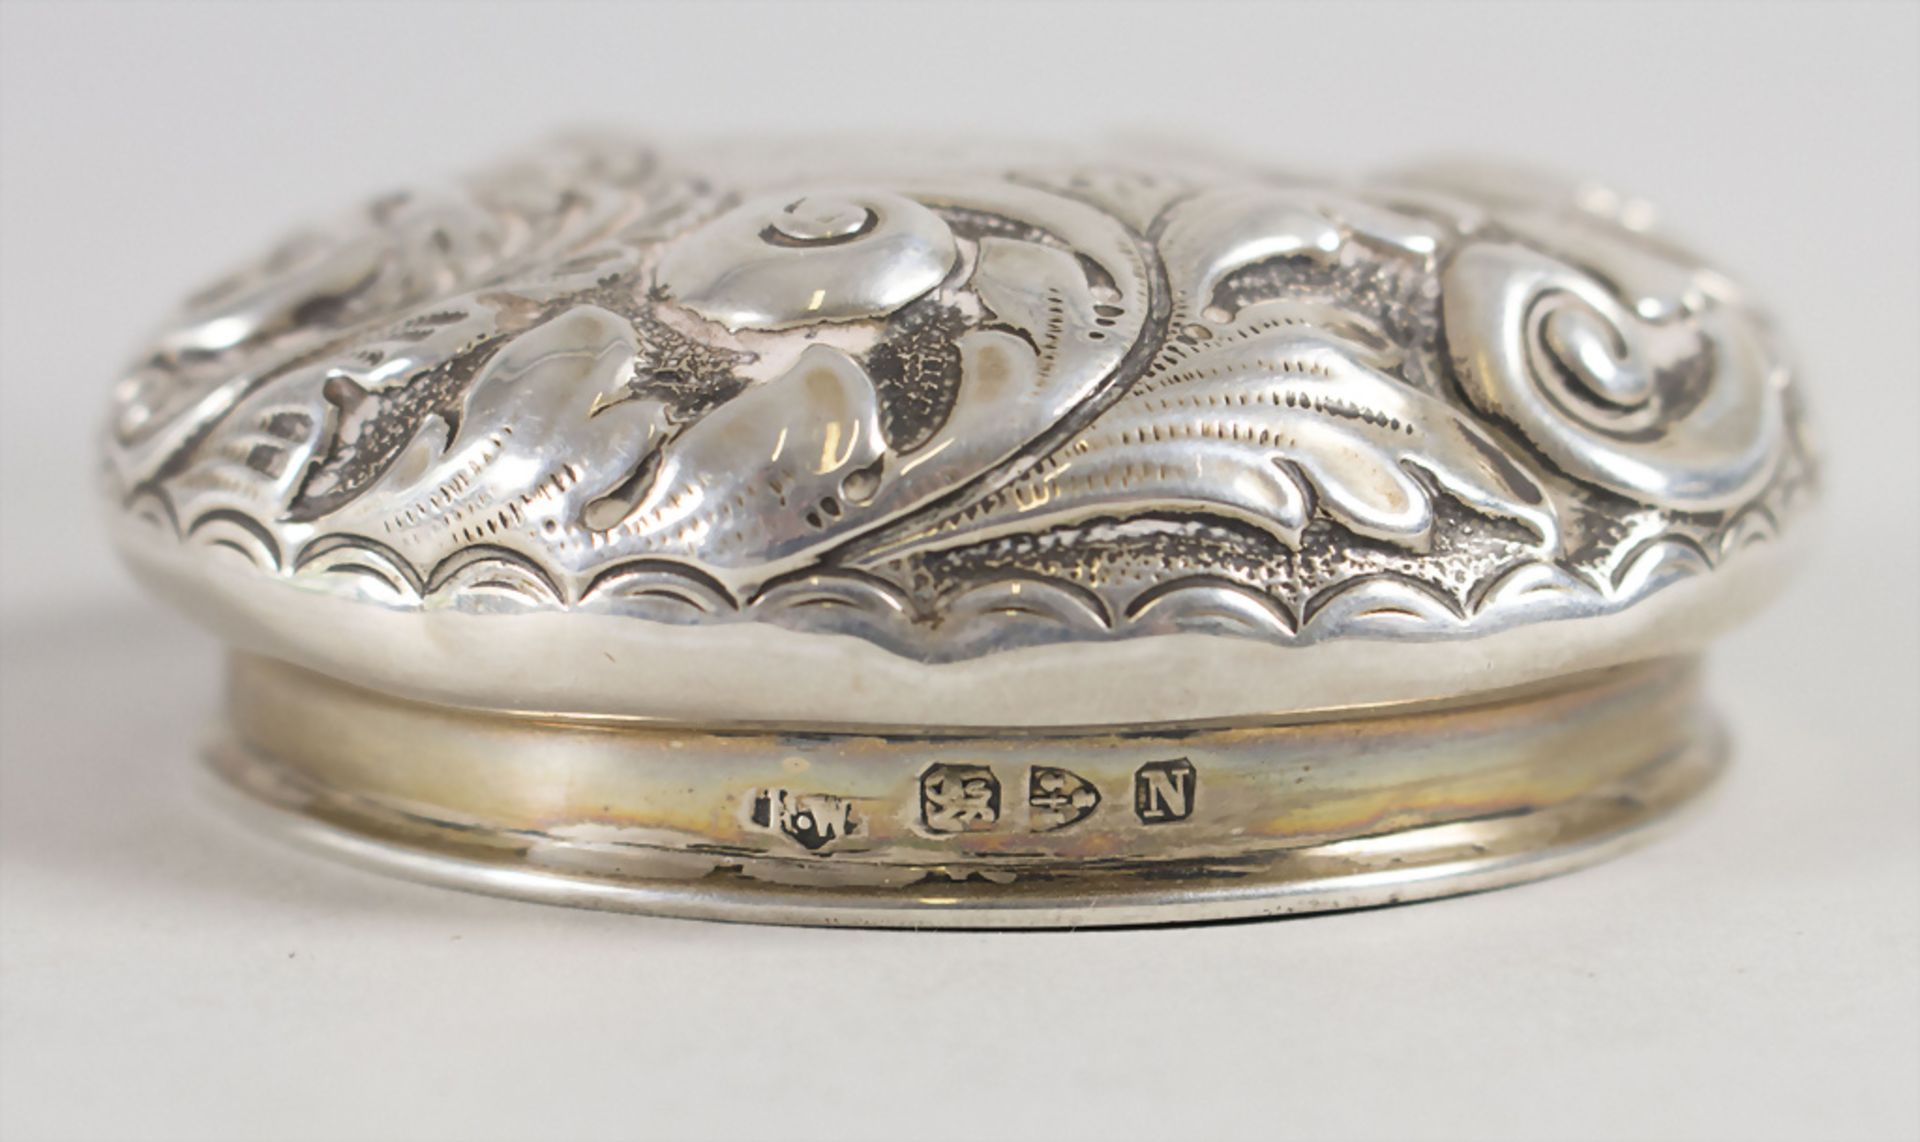 Glasdose mit Silberdeckel / A cut glass dresser jar with silver lid, Florence Warden, Chester, 1896 - Image 4 of 4